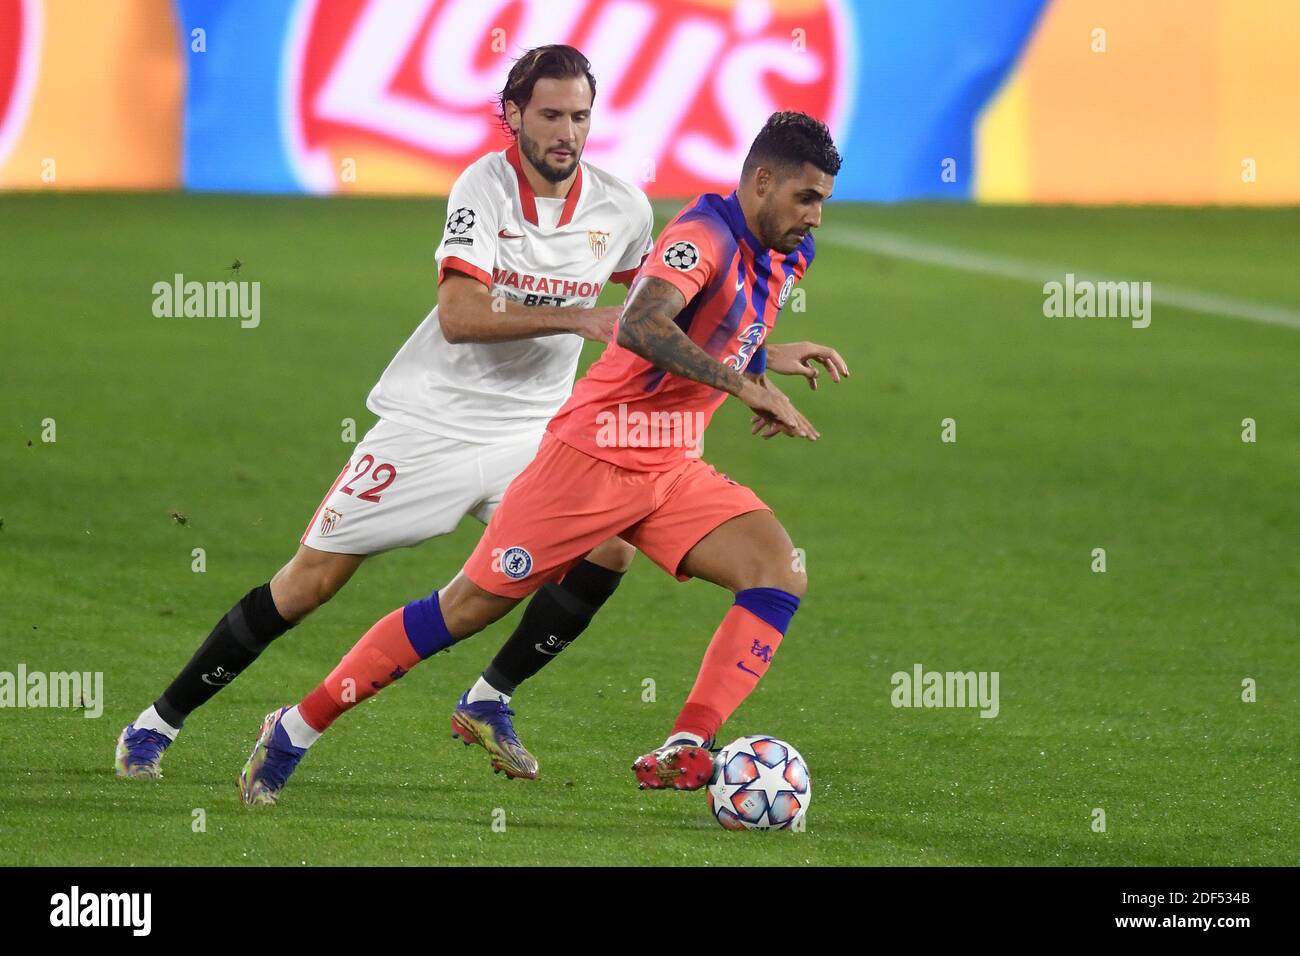 SEVILLE, SPAIN - DECEMBER 02: Franco Vazquez of FC Sevilla and Emerson of Chelsea FC during the UEFA Champions League Group E stage match between FC Sevilla and Chelsea FC at Estadio Ramon Sanchez-Pizjuan on December 2, 2020 in Seville, Spain. (Photo by Juan Jose Ubeda/MB Media) Stock Photo